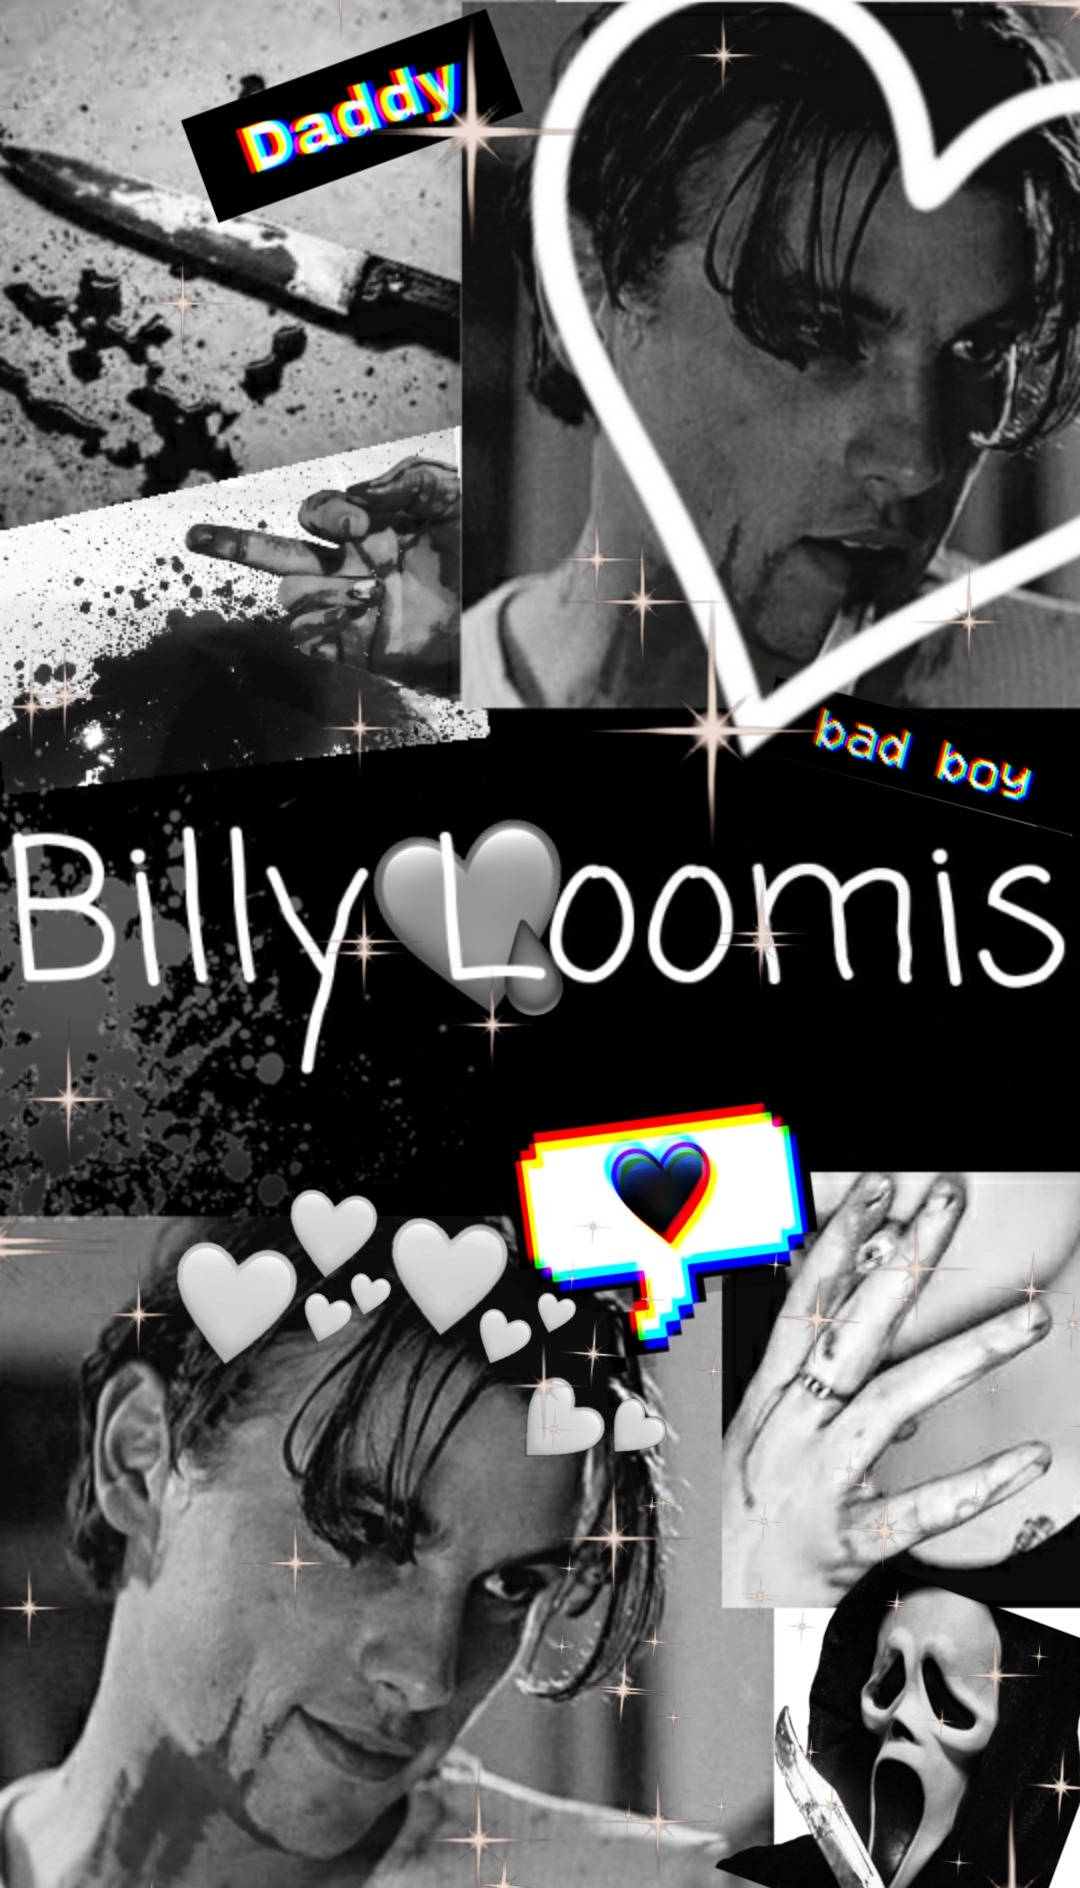 Monochrome Poster Of Billy Loomis Wallpaper